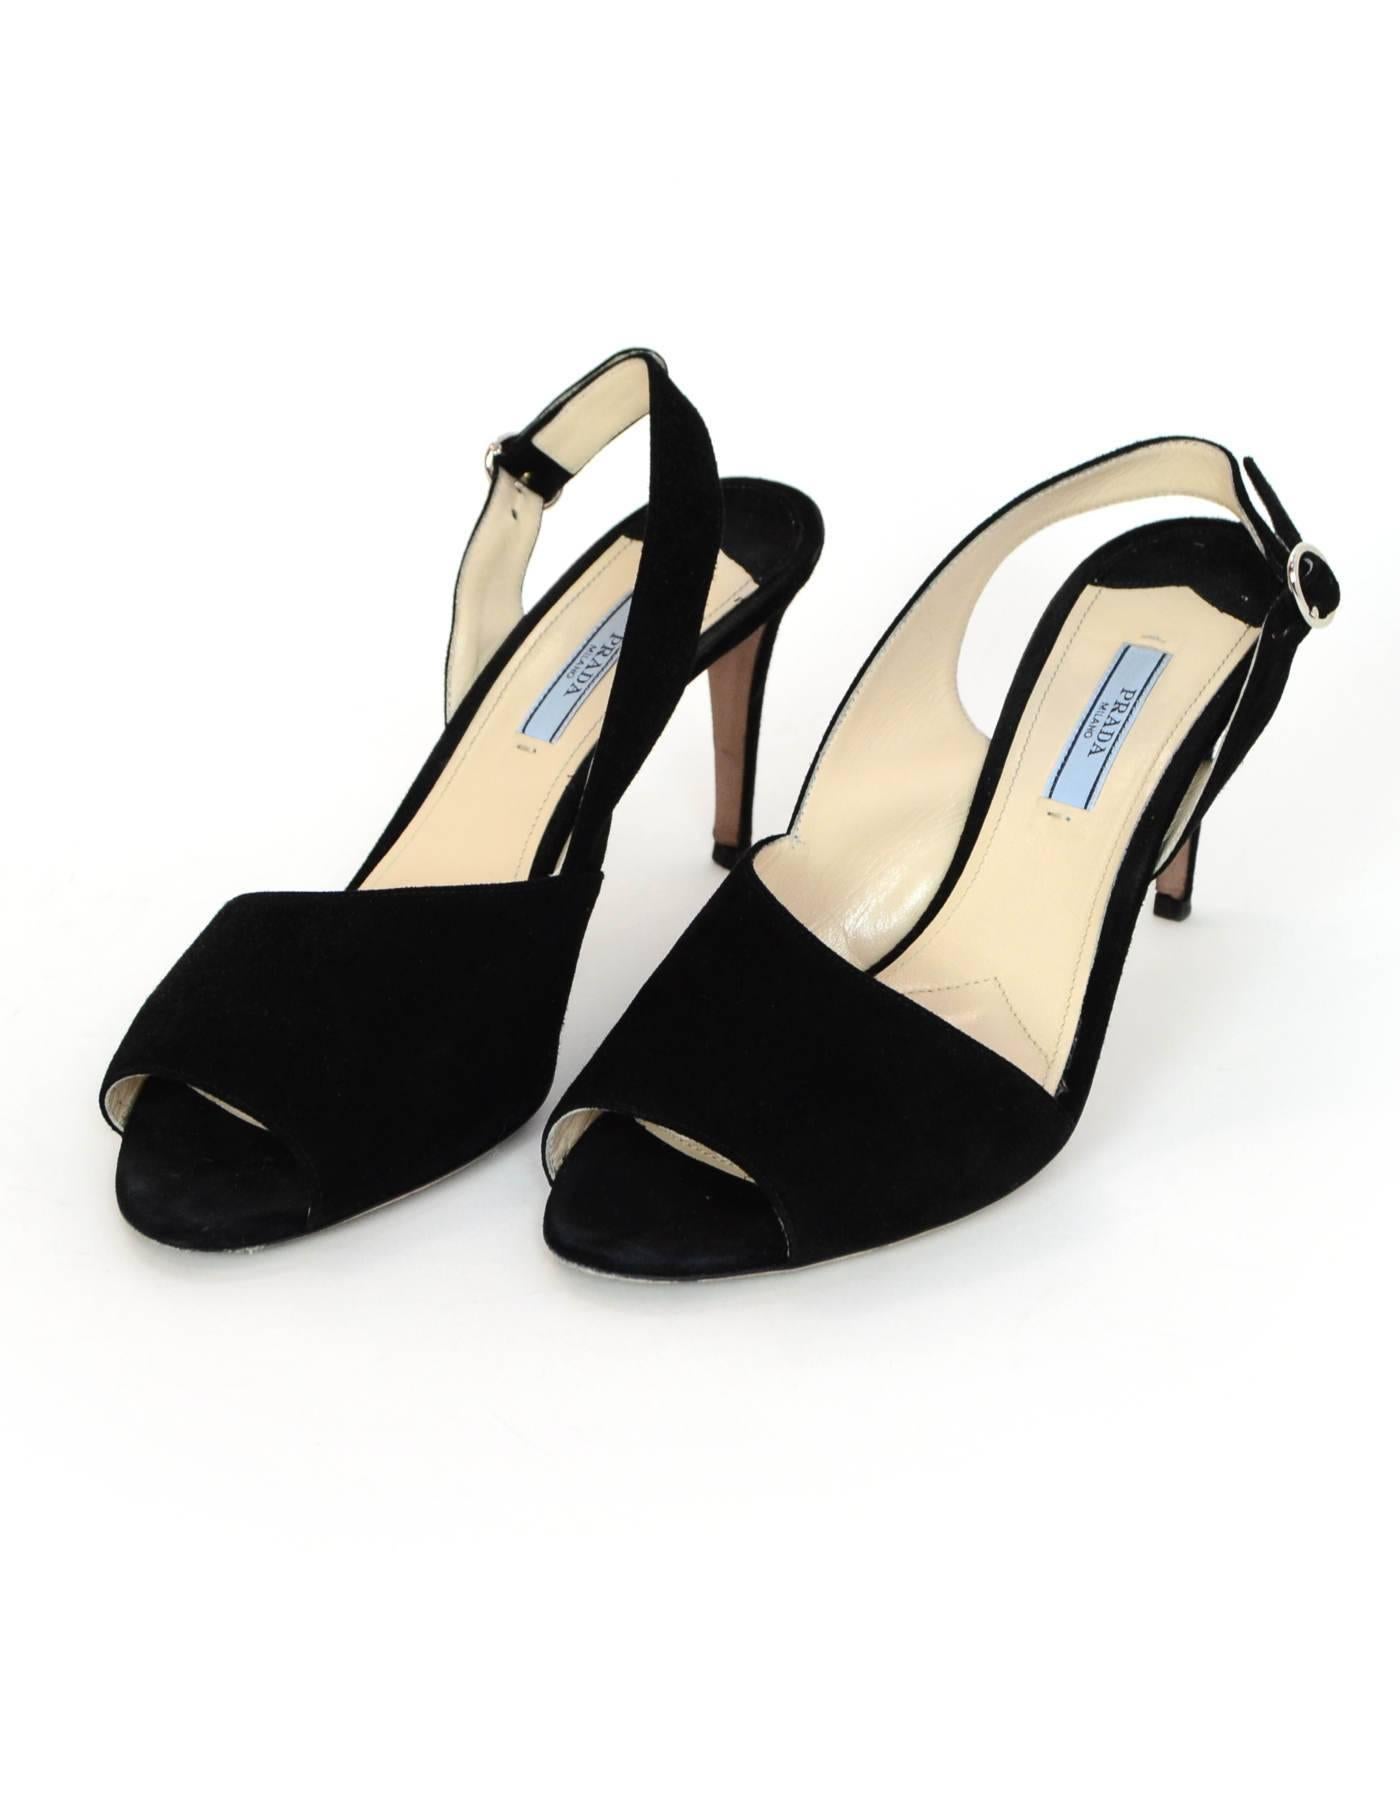 Prada Black Suede d'Orsay Open-Toe Pumps Sz 39.5

Made In: Italy
Color: Black
Materials: Suede
Closure/Opening: Sling back
Sole Stamp: Prada 39.5 Made in Italy
Retail Price: $690 + tax
Overall Condition: Excellent pre-owned condition with the